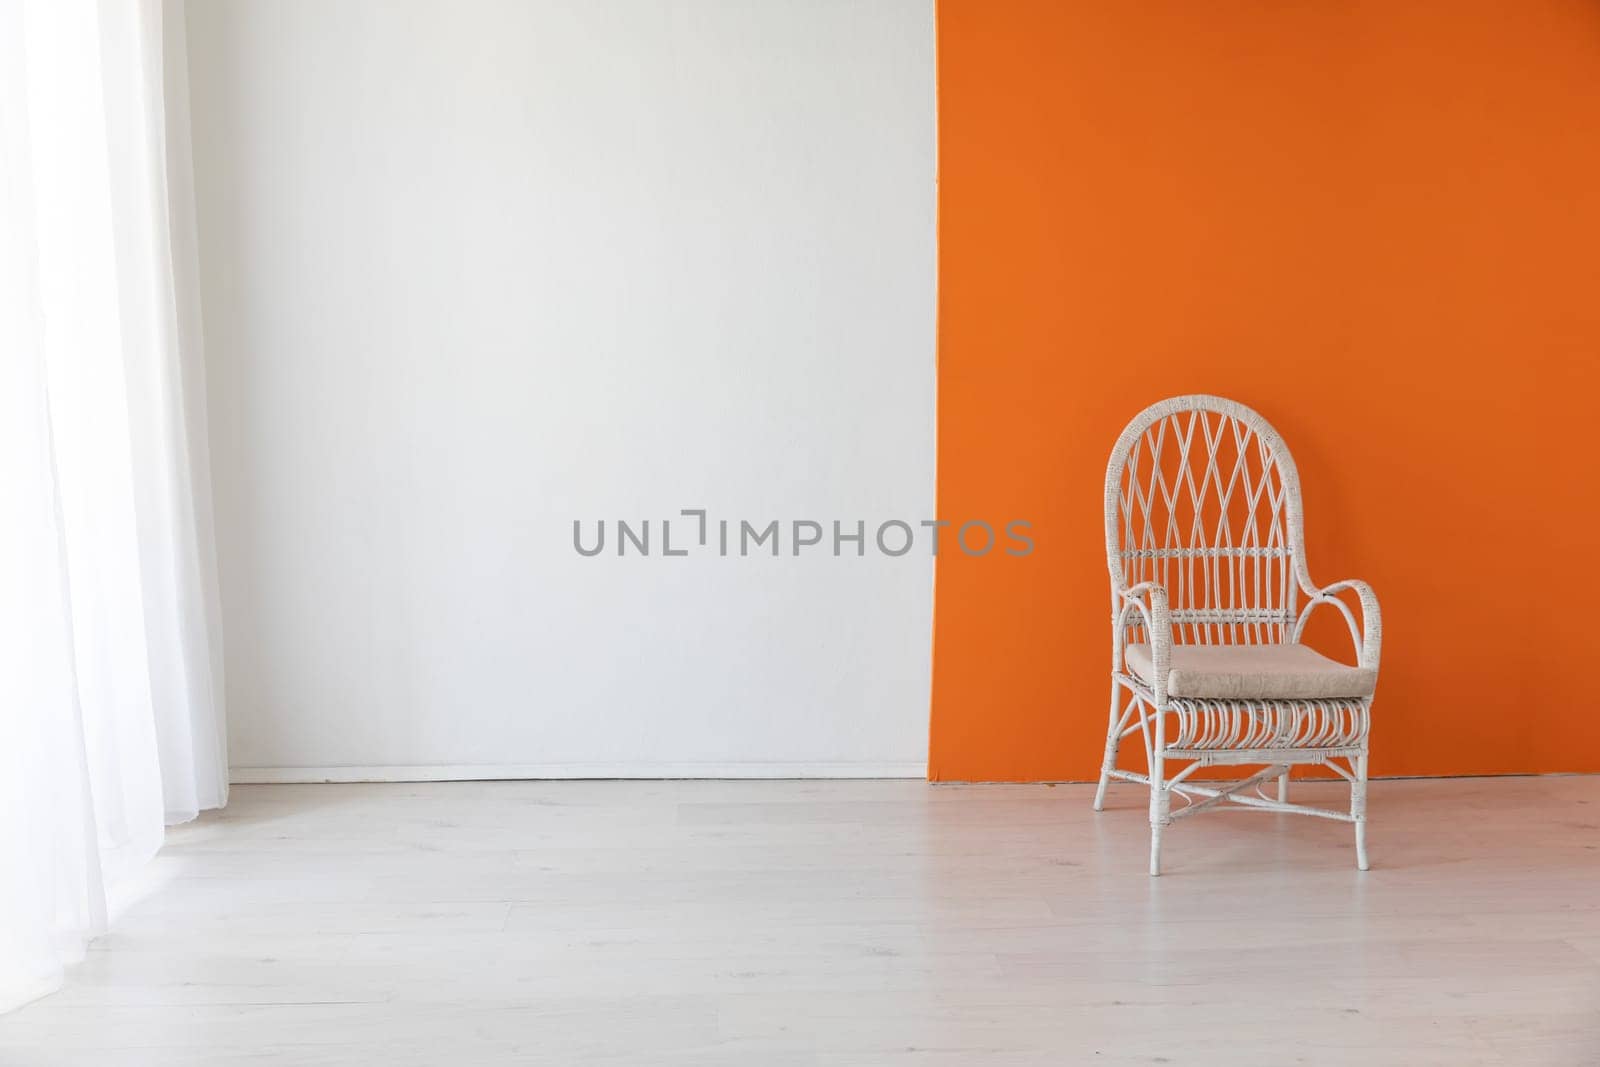 Vintage chair in the interior of an empty white and orange room by Simakov